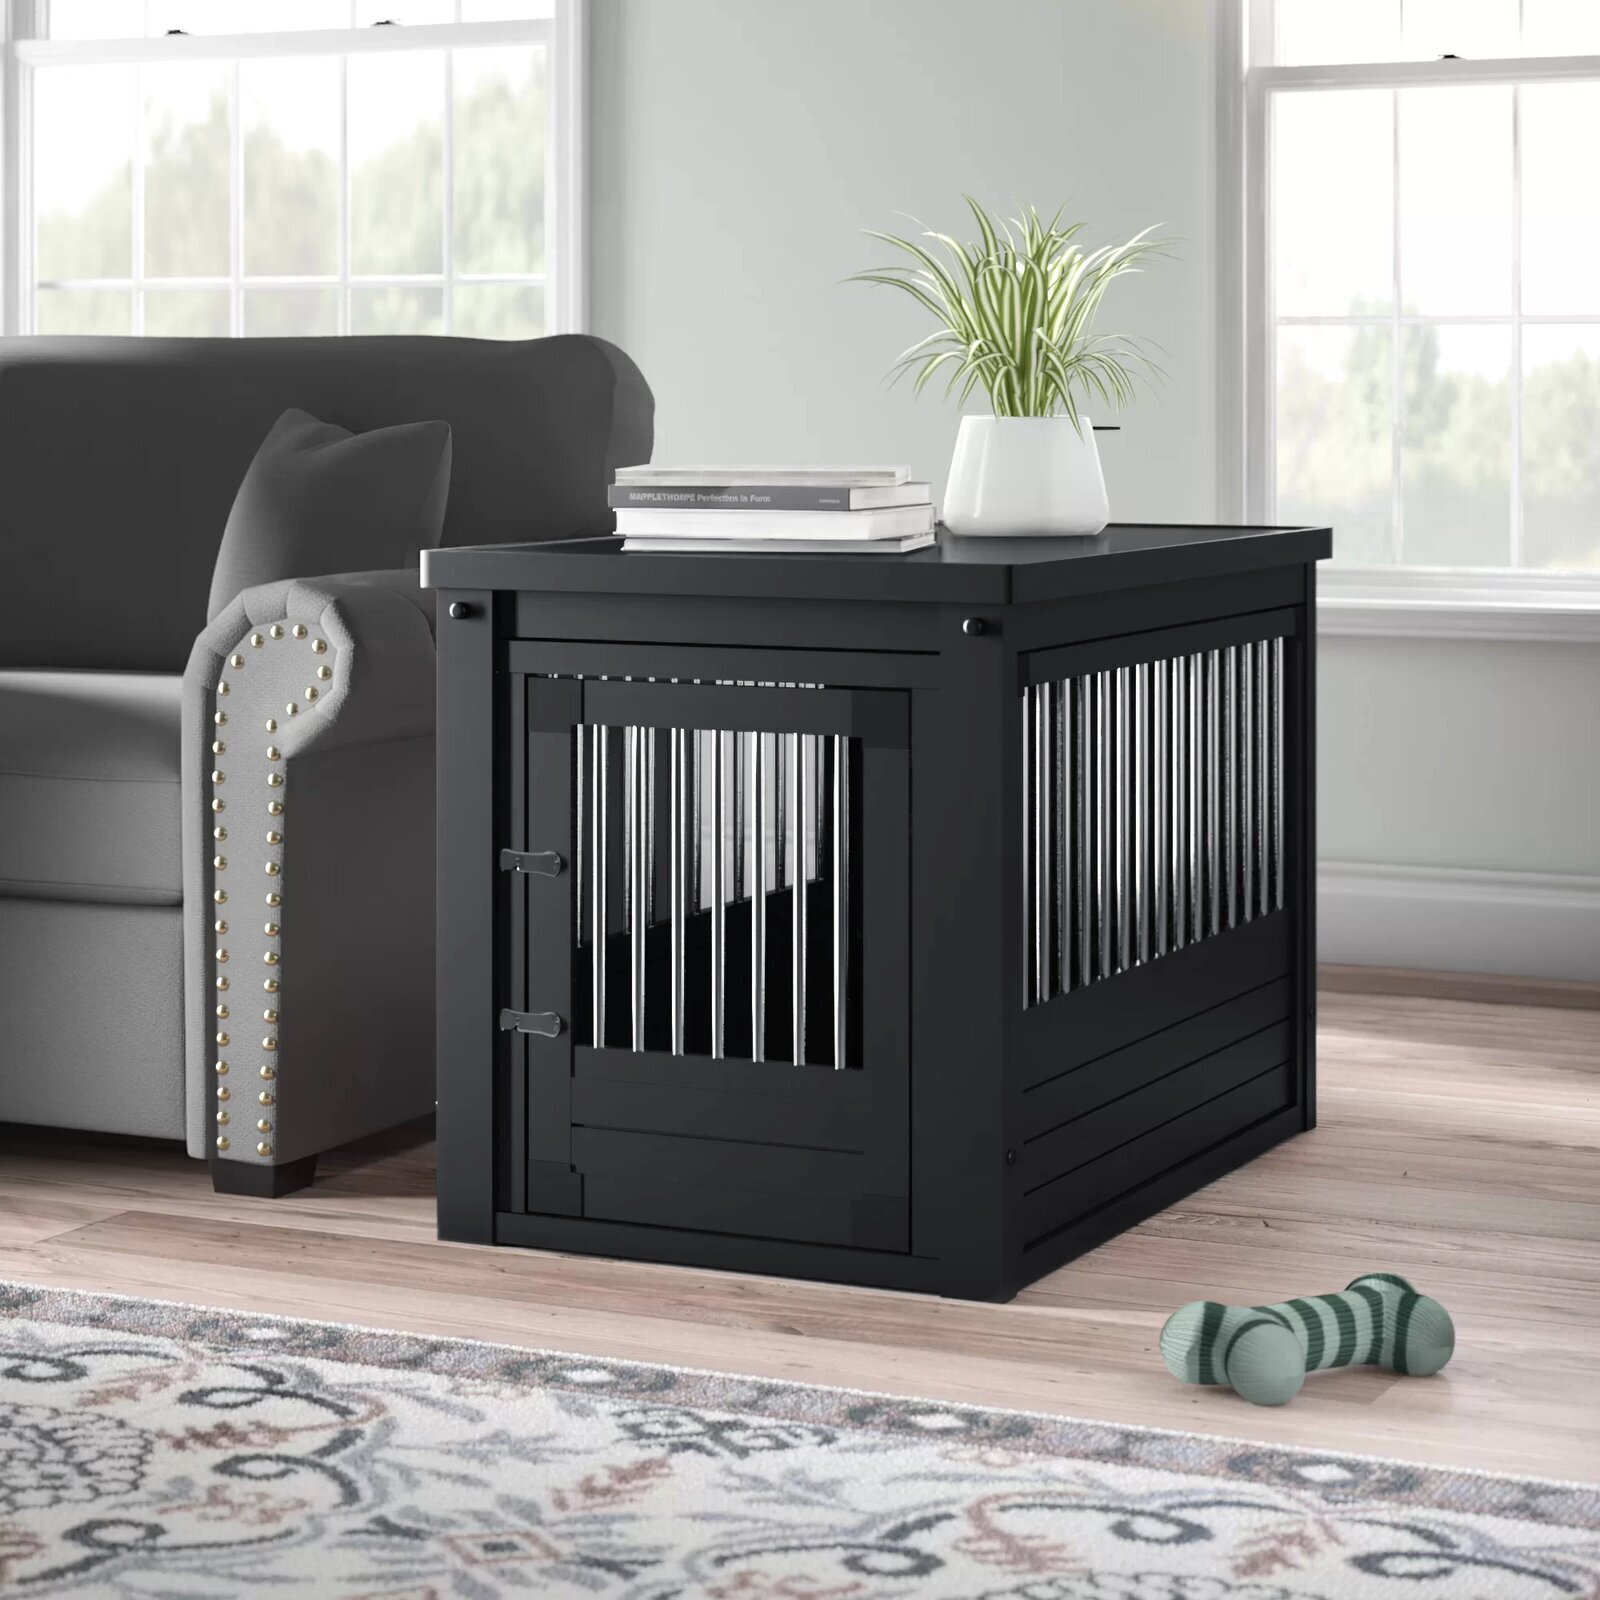 Black Rectangular Dog Crate With Spindles